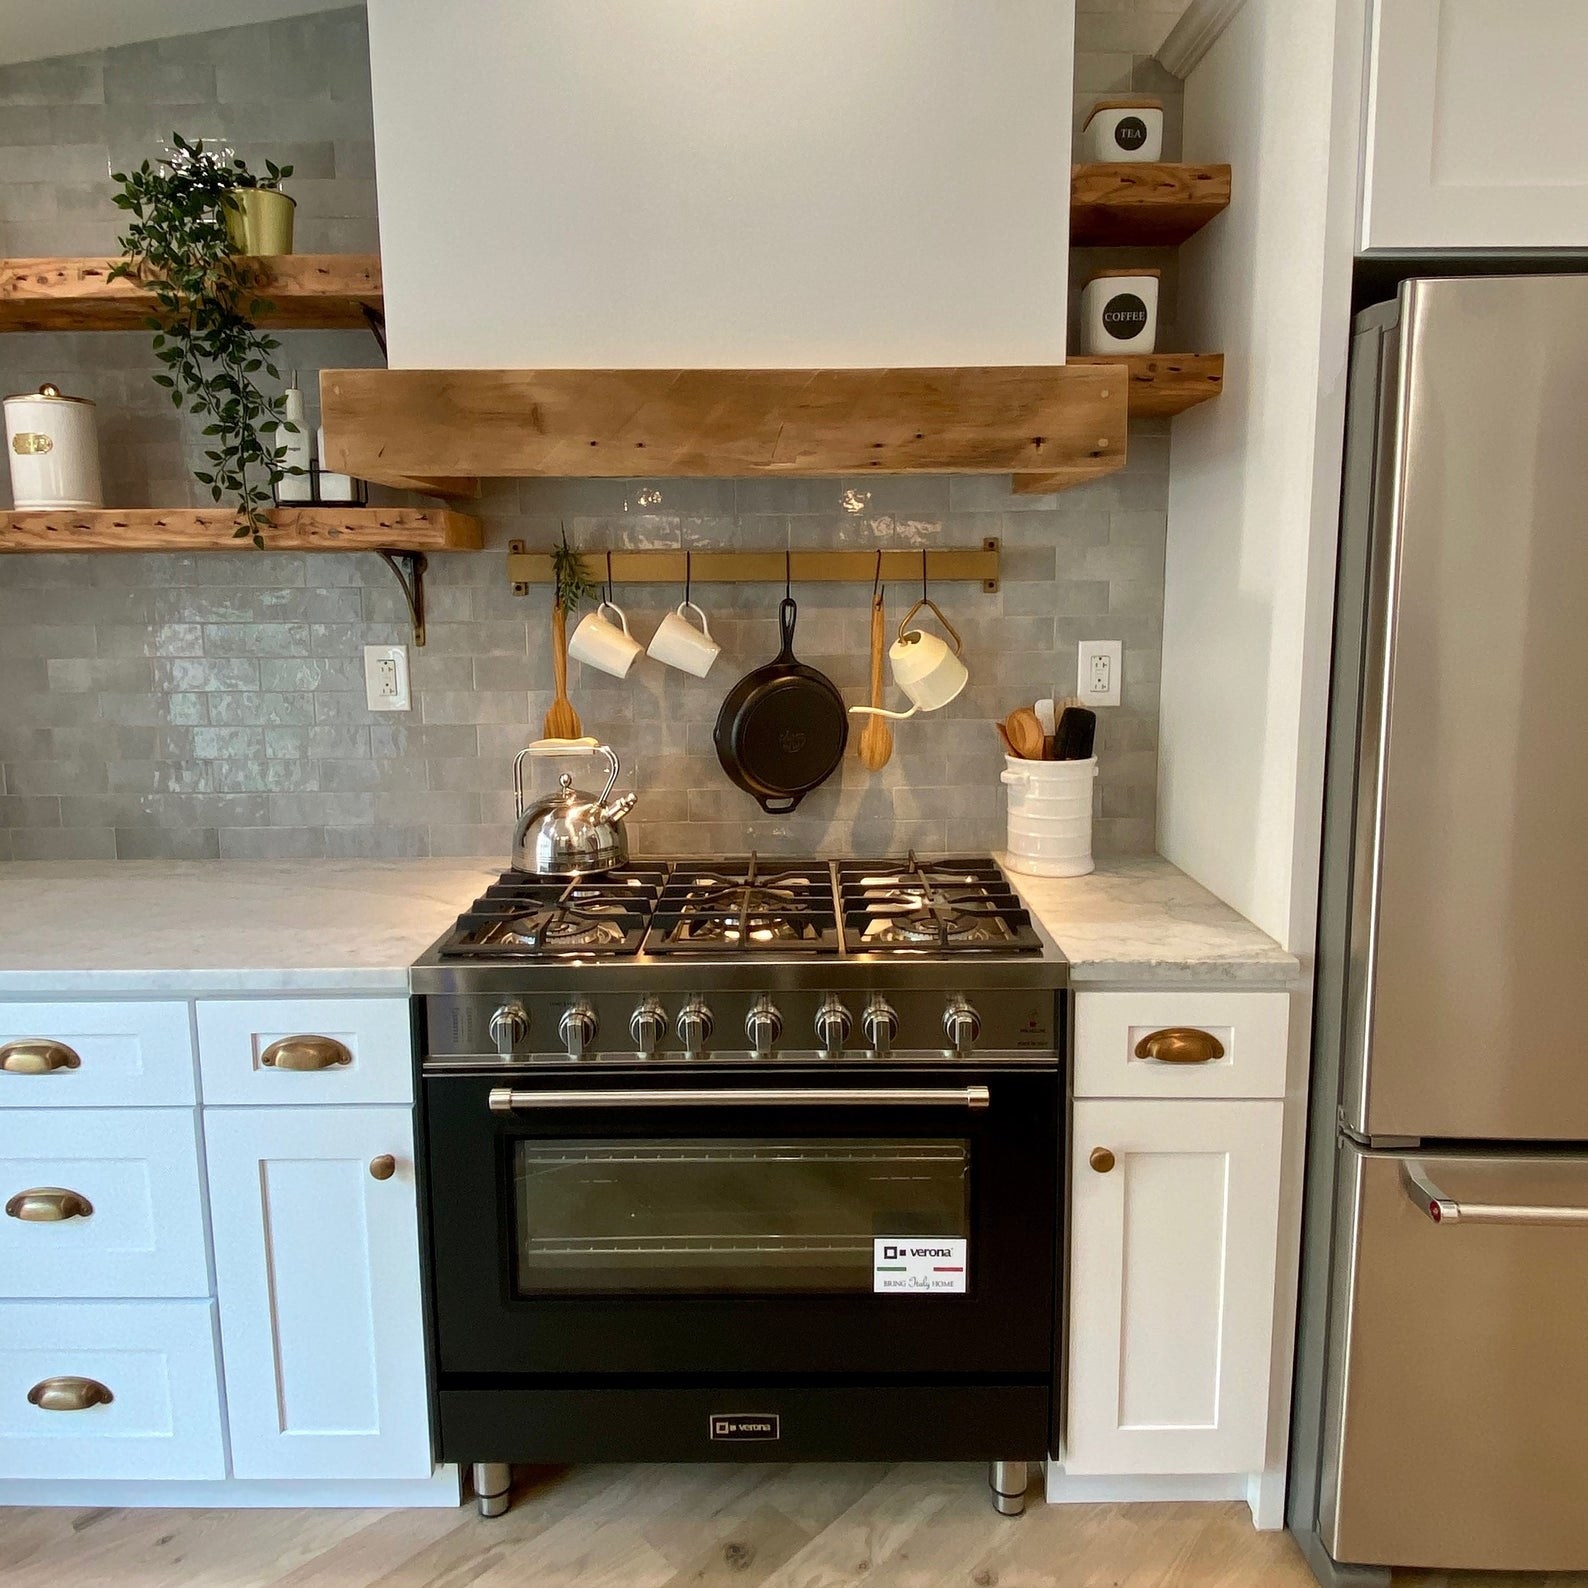 brass rod hung above stove with hooks for hanging kitchen essentials